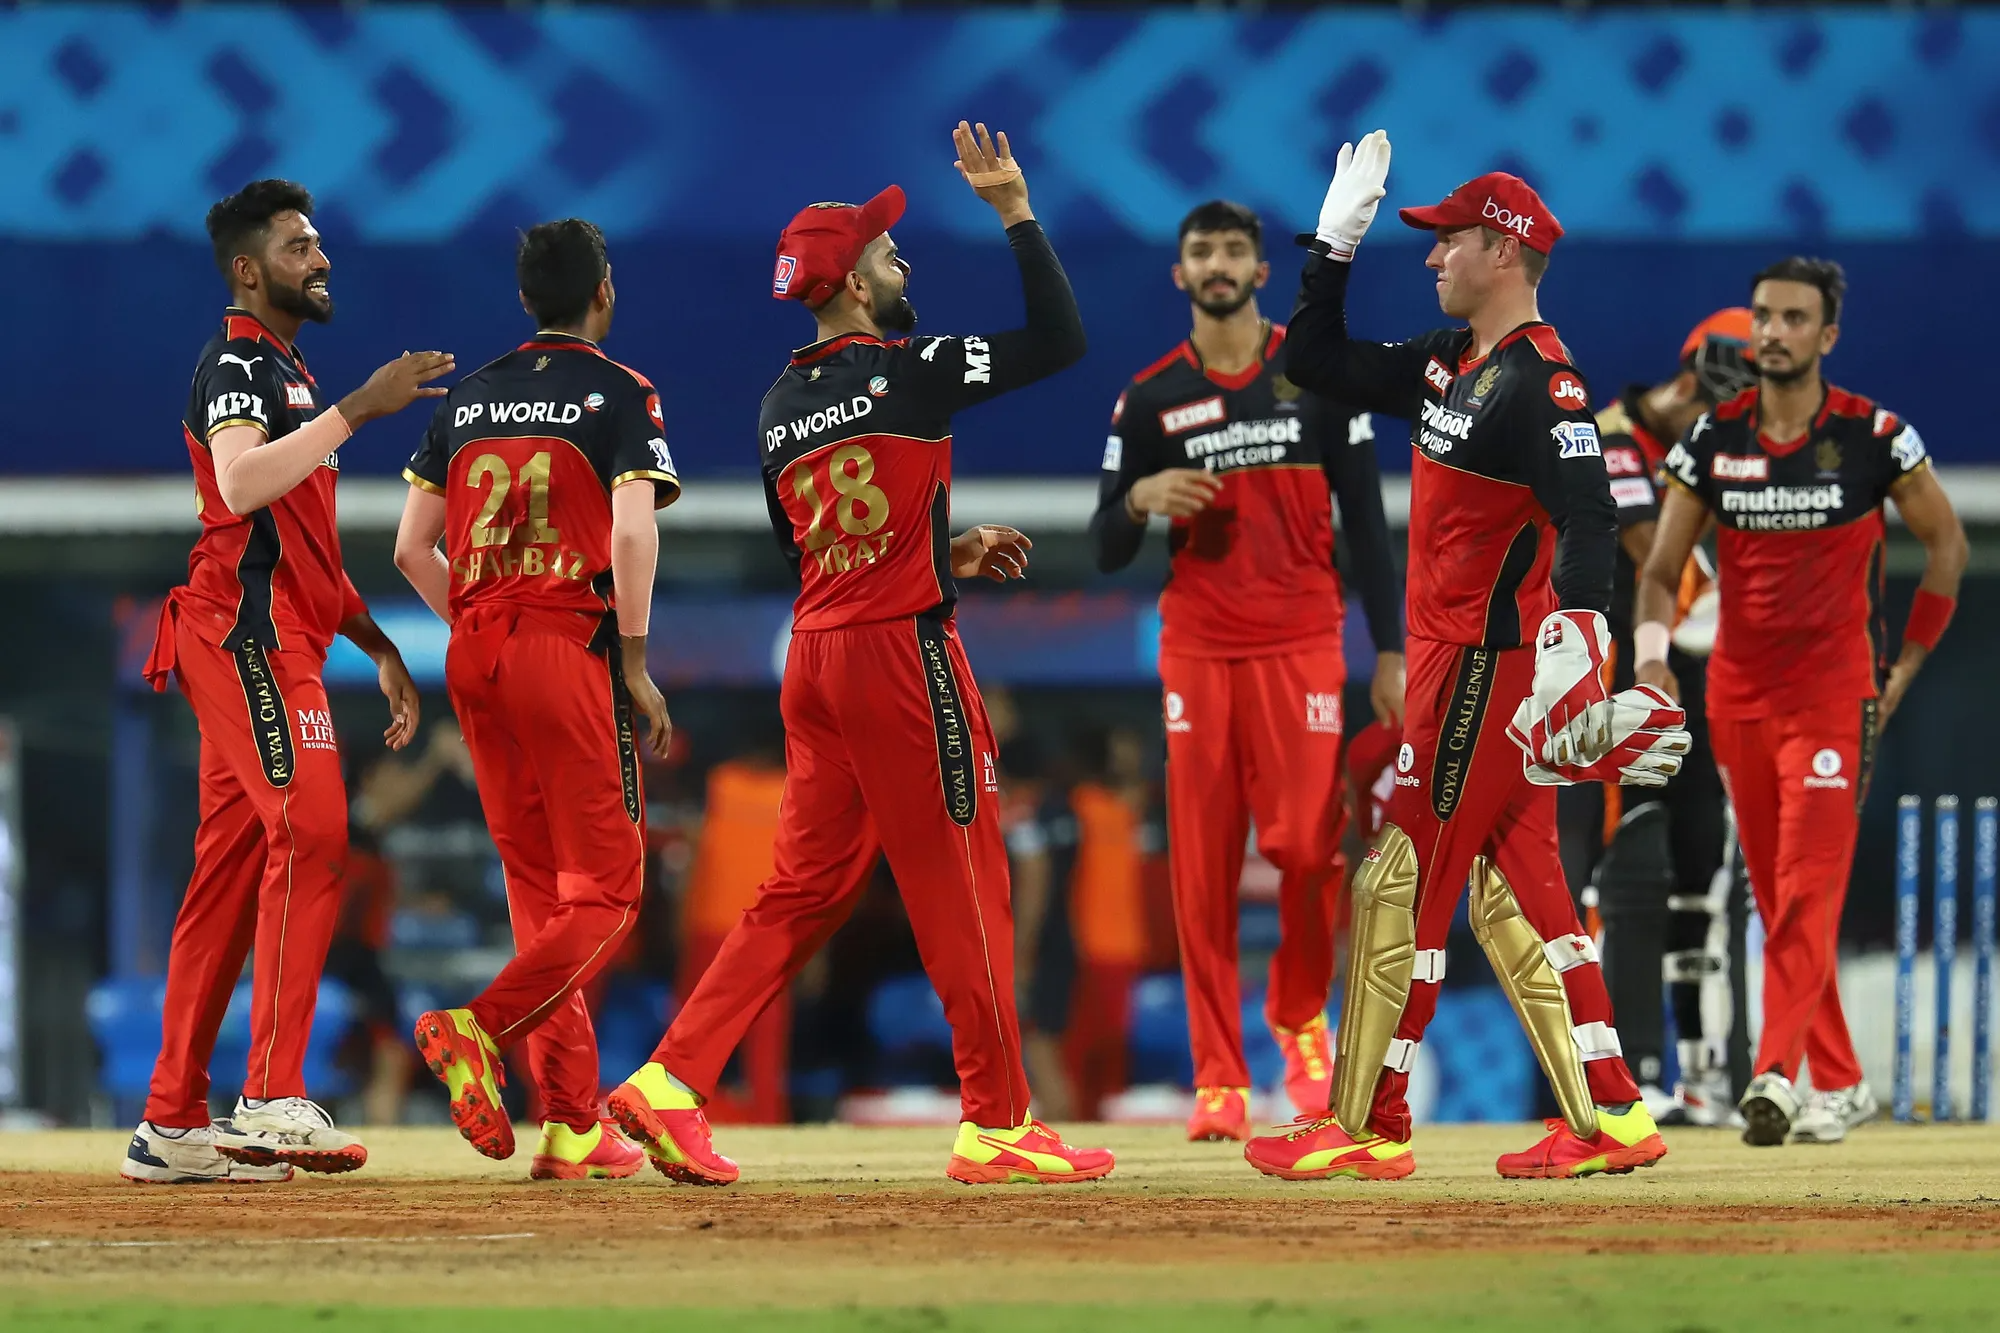 RCB are yet to lose a match in IPL 2021 | BCCI/IPL